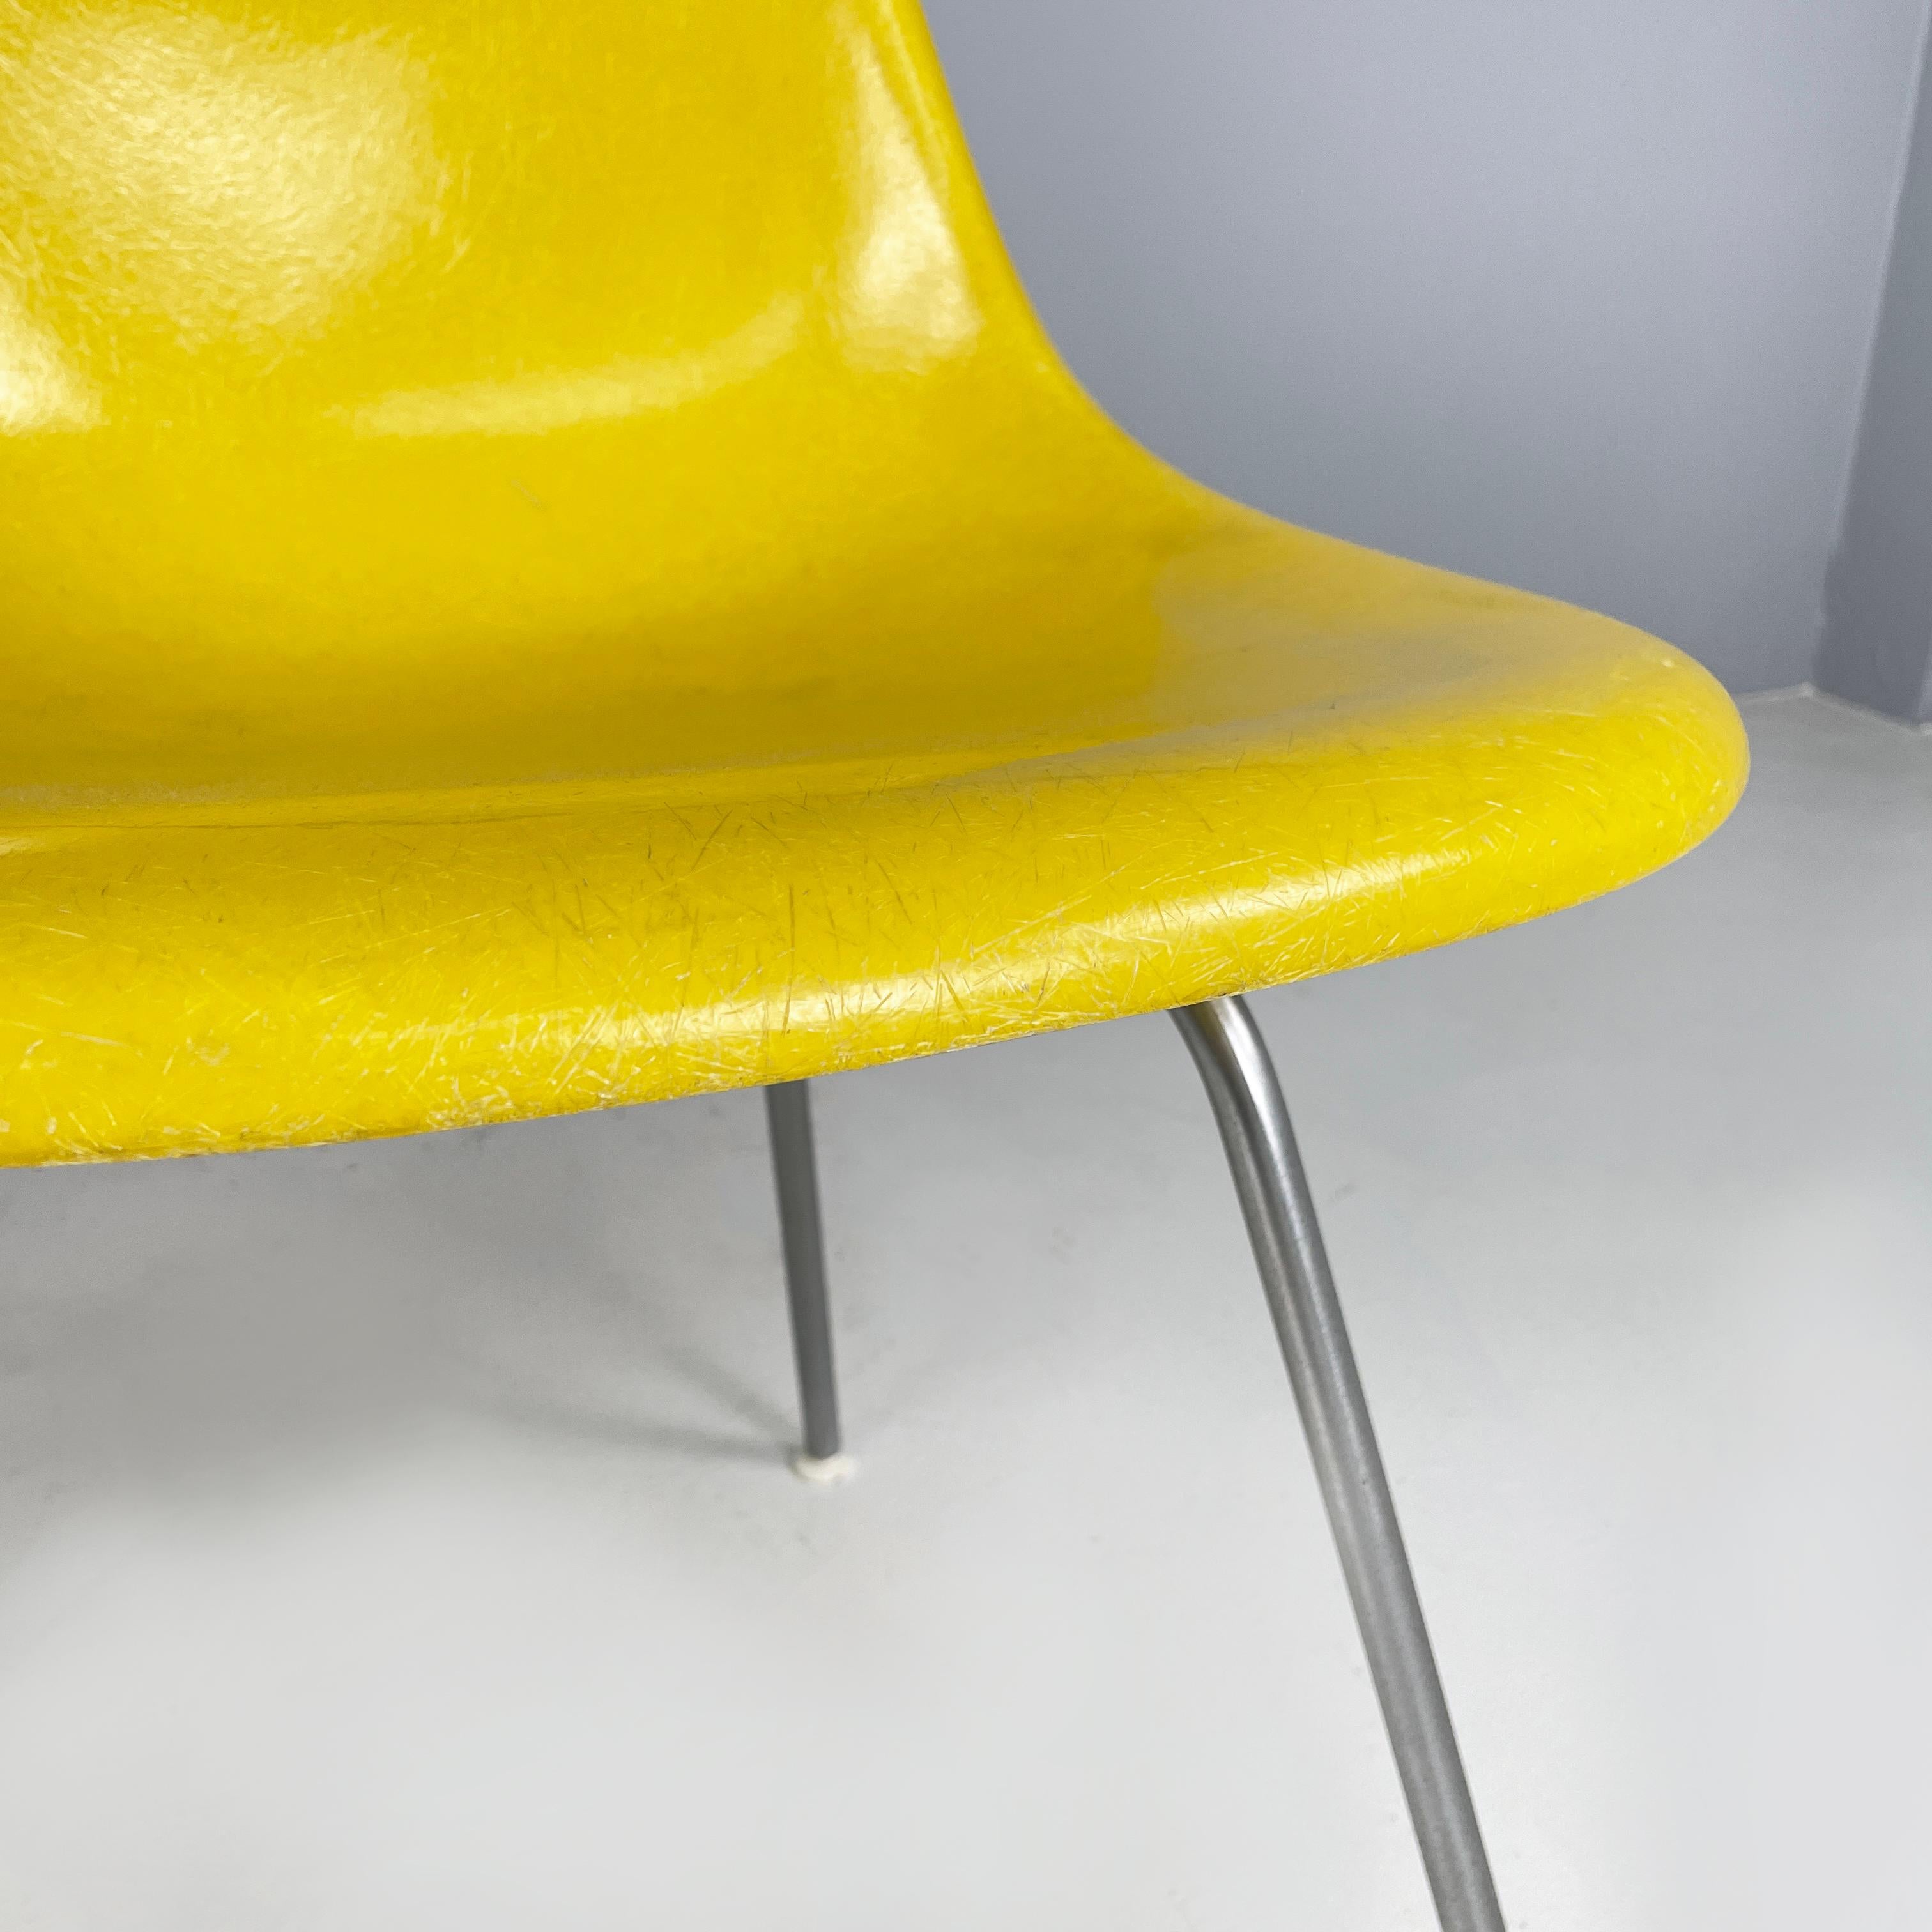 American Yellow Shell Chairs by Charles and Ray Eames for Herman Miller, 1970s For Sale 3